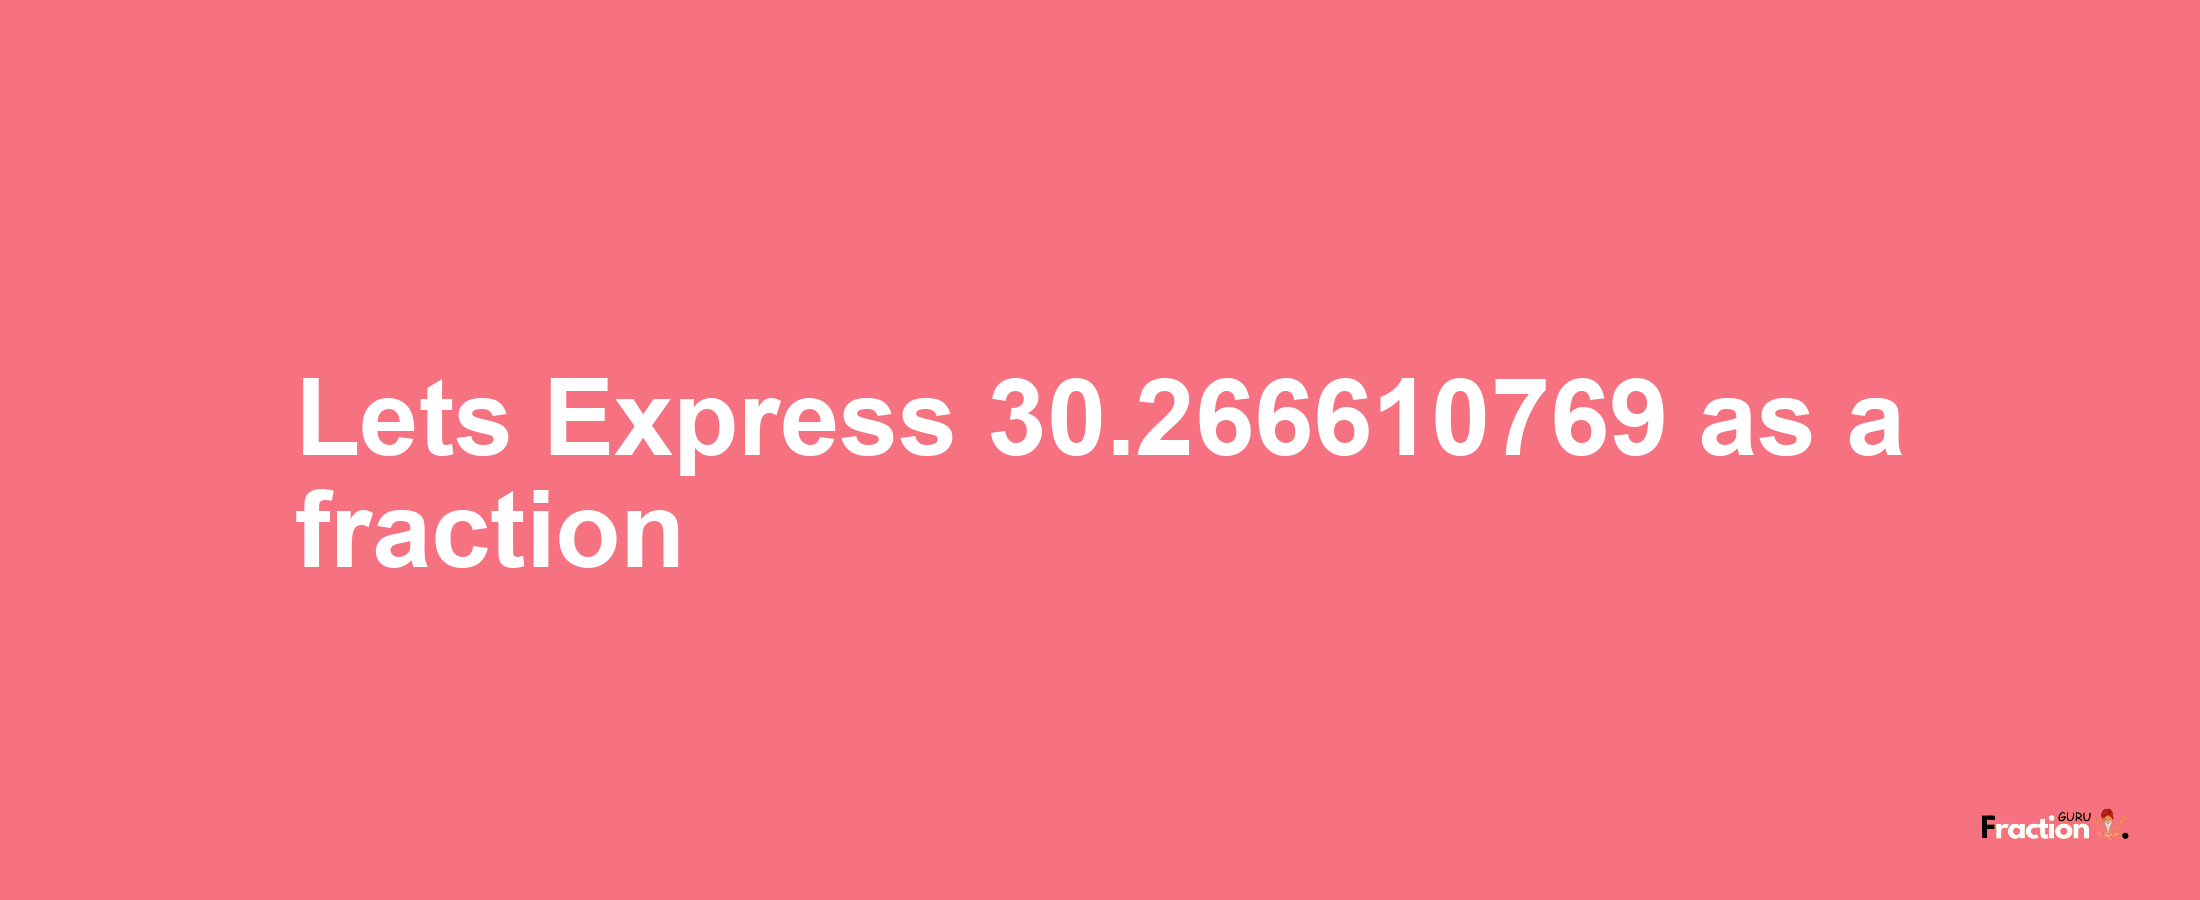 Lets Express 30.266610769 as afraction